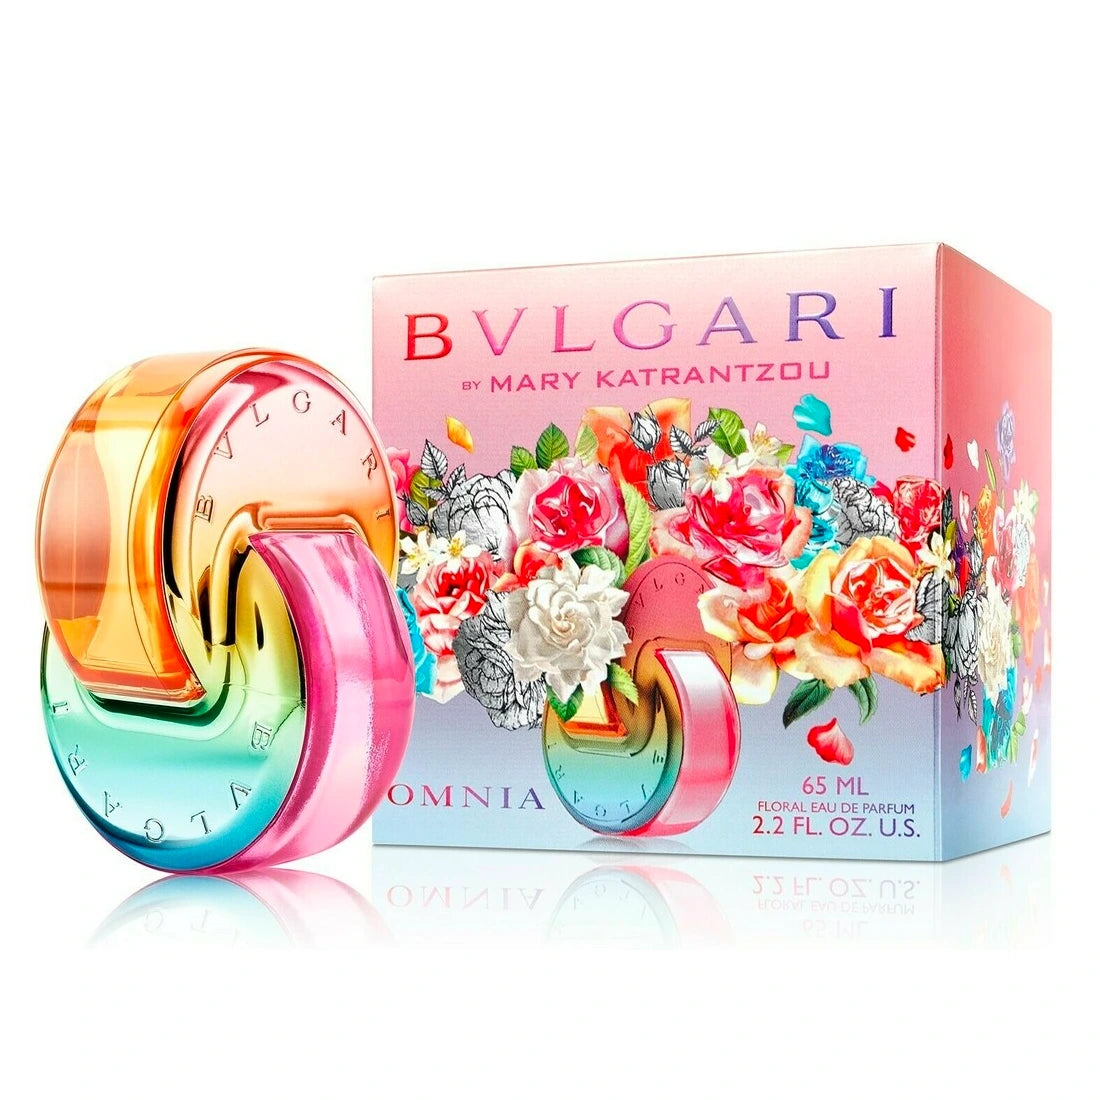 <div>
<meta charset="utf-8">
<b>Omnia by Mary Katrantzou</b><span> by </span><b>Bvlgari</b><span> is a fragrance for women. This is a new fragrance. </span><b>Omnia by Mary Katrantzou</b><span> was launched in 2021. The nose behind this fragrance is Alberto Morillas. Top notes are Fig Leaf and Mandarin Orange; middle notes are Gardenia and Orange Blossom; base notes are White Woods and Musk.</span>
</div>
<ul data-mce-fragment="1">
<li data-mce-fragment="1">A floral fruity fragrance for modern women.</li>
<li data-mce-fragment="1">Fresh sweet green bright &amp; delightful.</li>
</ul>